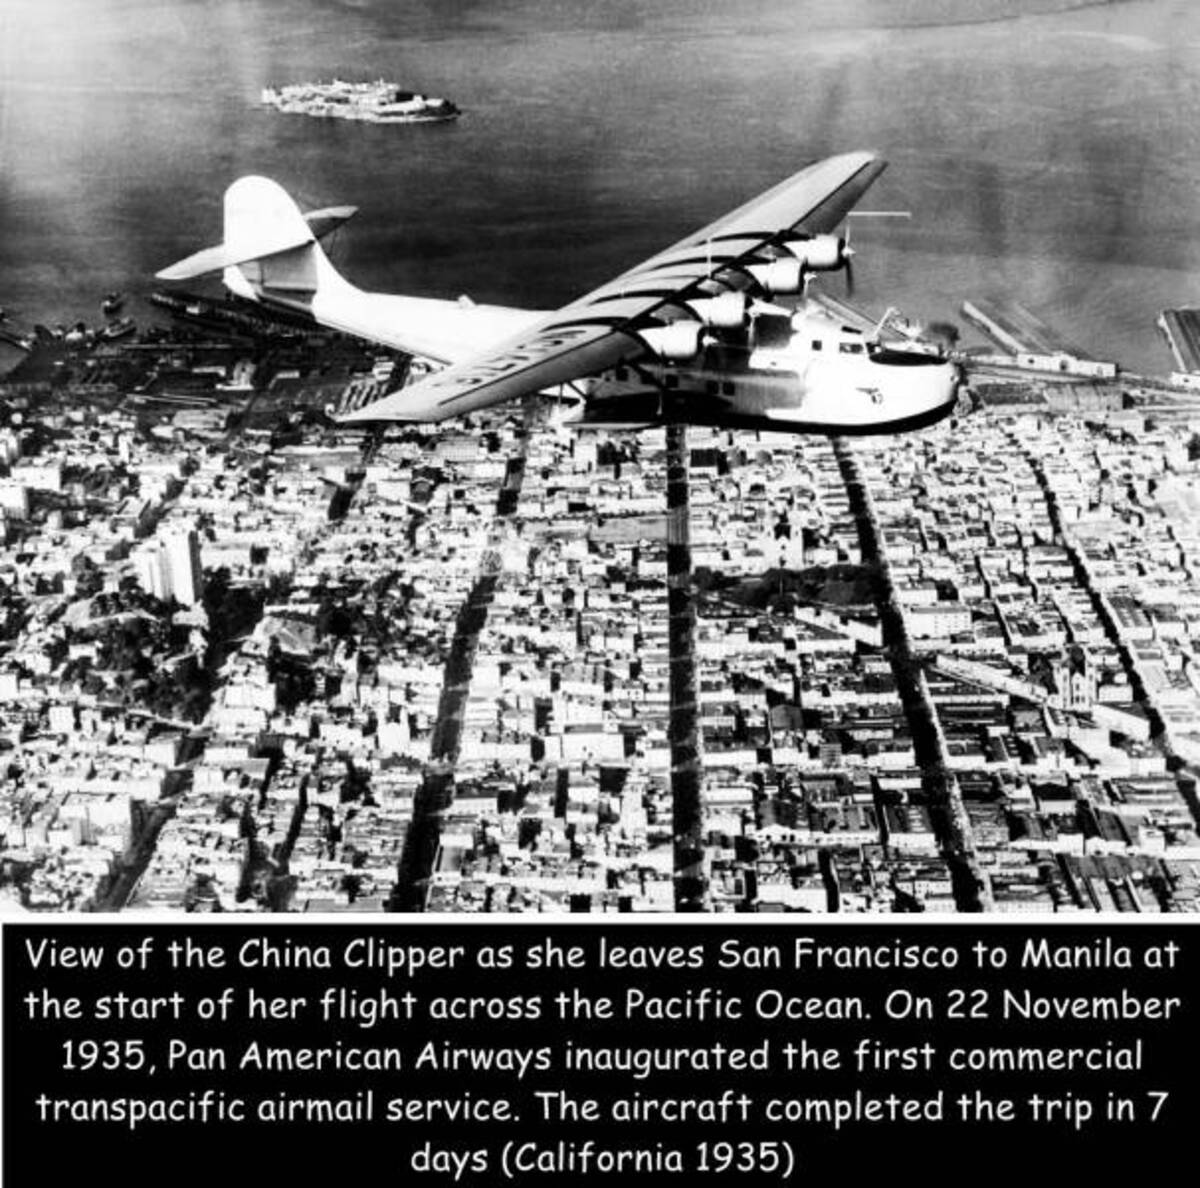 airplane - View of the China Clipper as she leaves San Francisco to Manila at the start of her flight across the Pacific Ocean. On , Pan American Airways inaugurated the first commercial transpacific airmail service. The aircraft completed the trip in 7 d